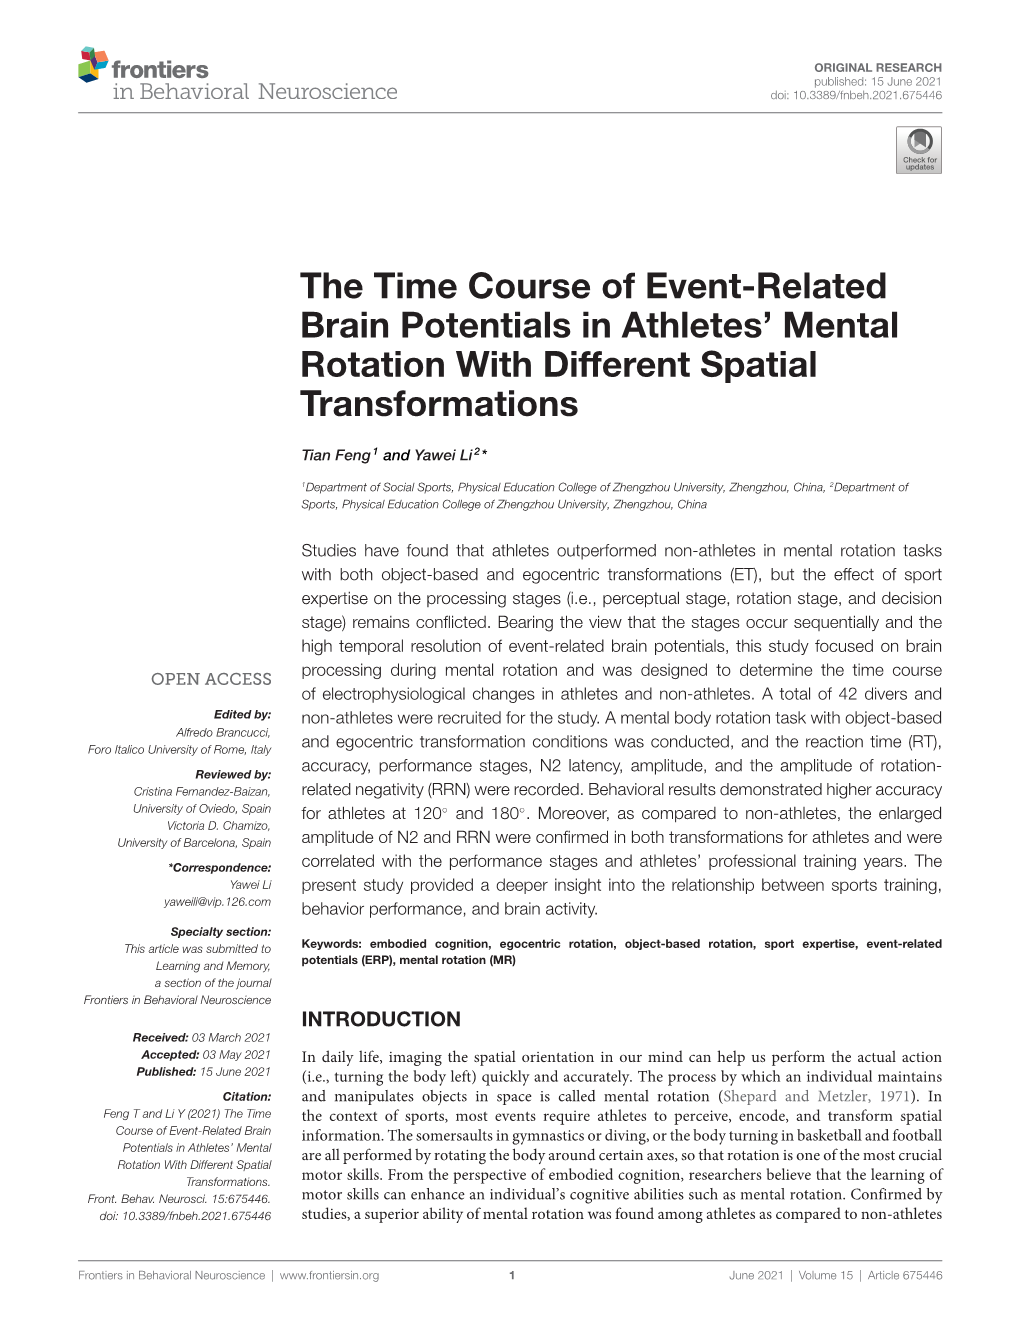 The Time Course of Event-Related Brain Potentials in Athletes' Mental